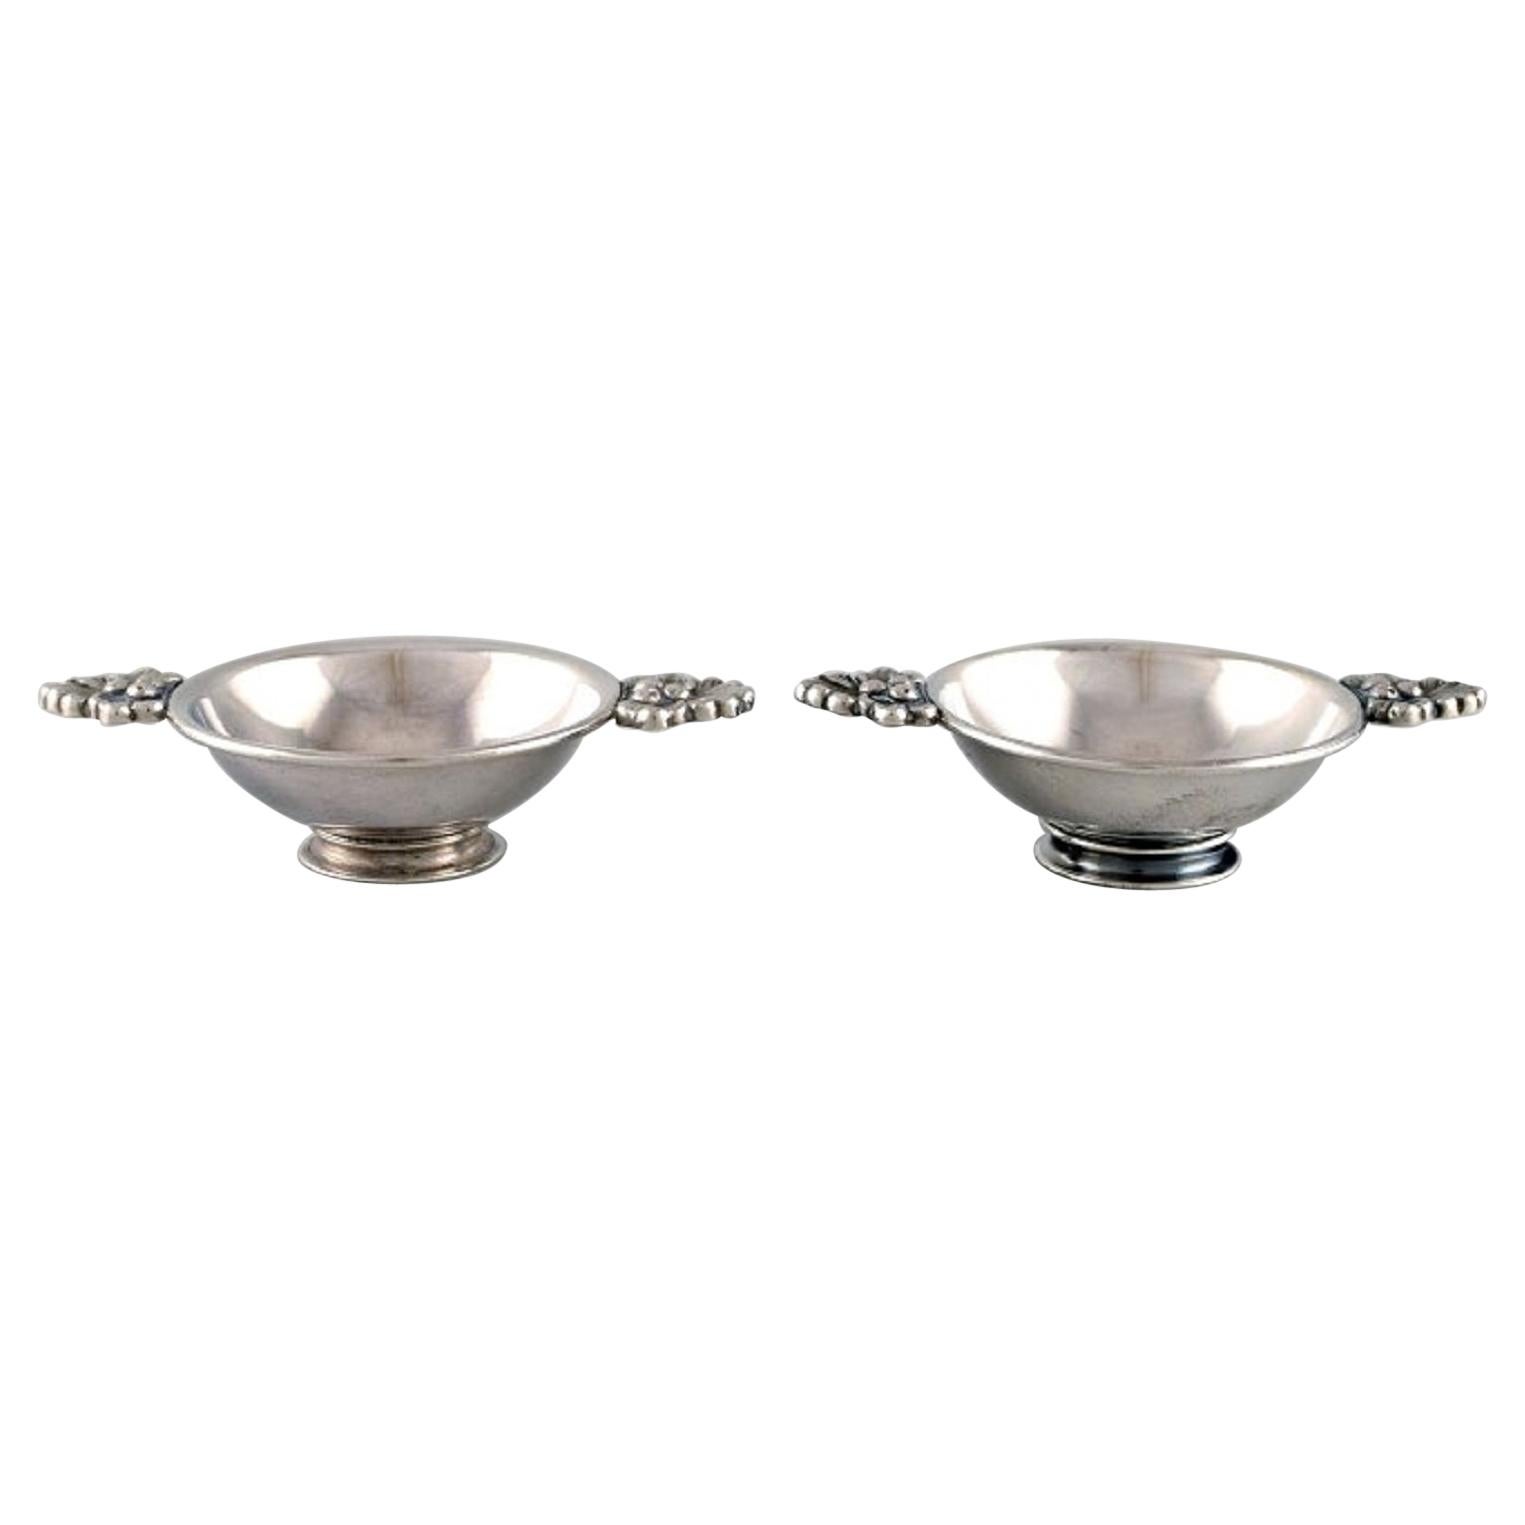 Franz Hingelberg, Two Salt Vessels in Sterling Silver with Leaf-Shaped Handles For Sale